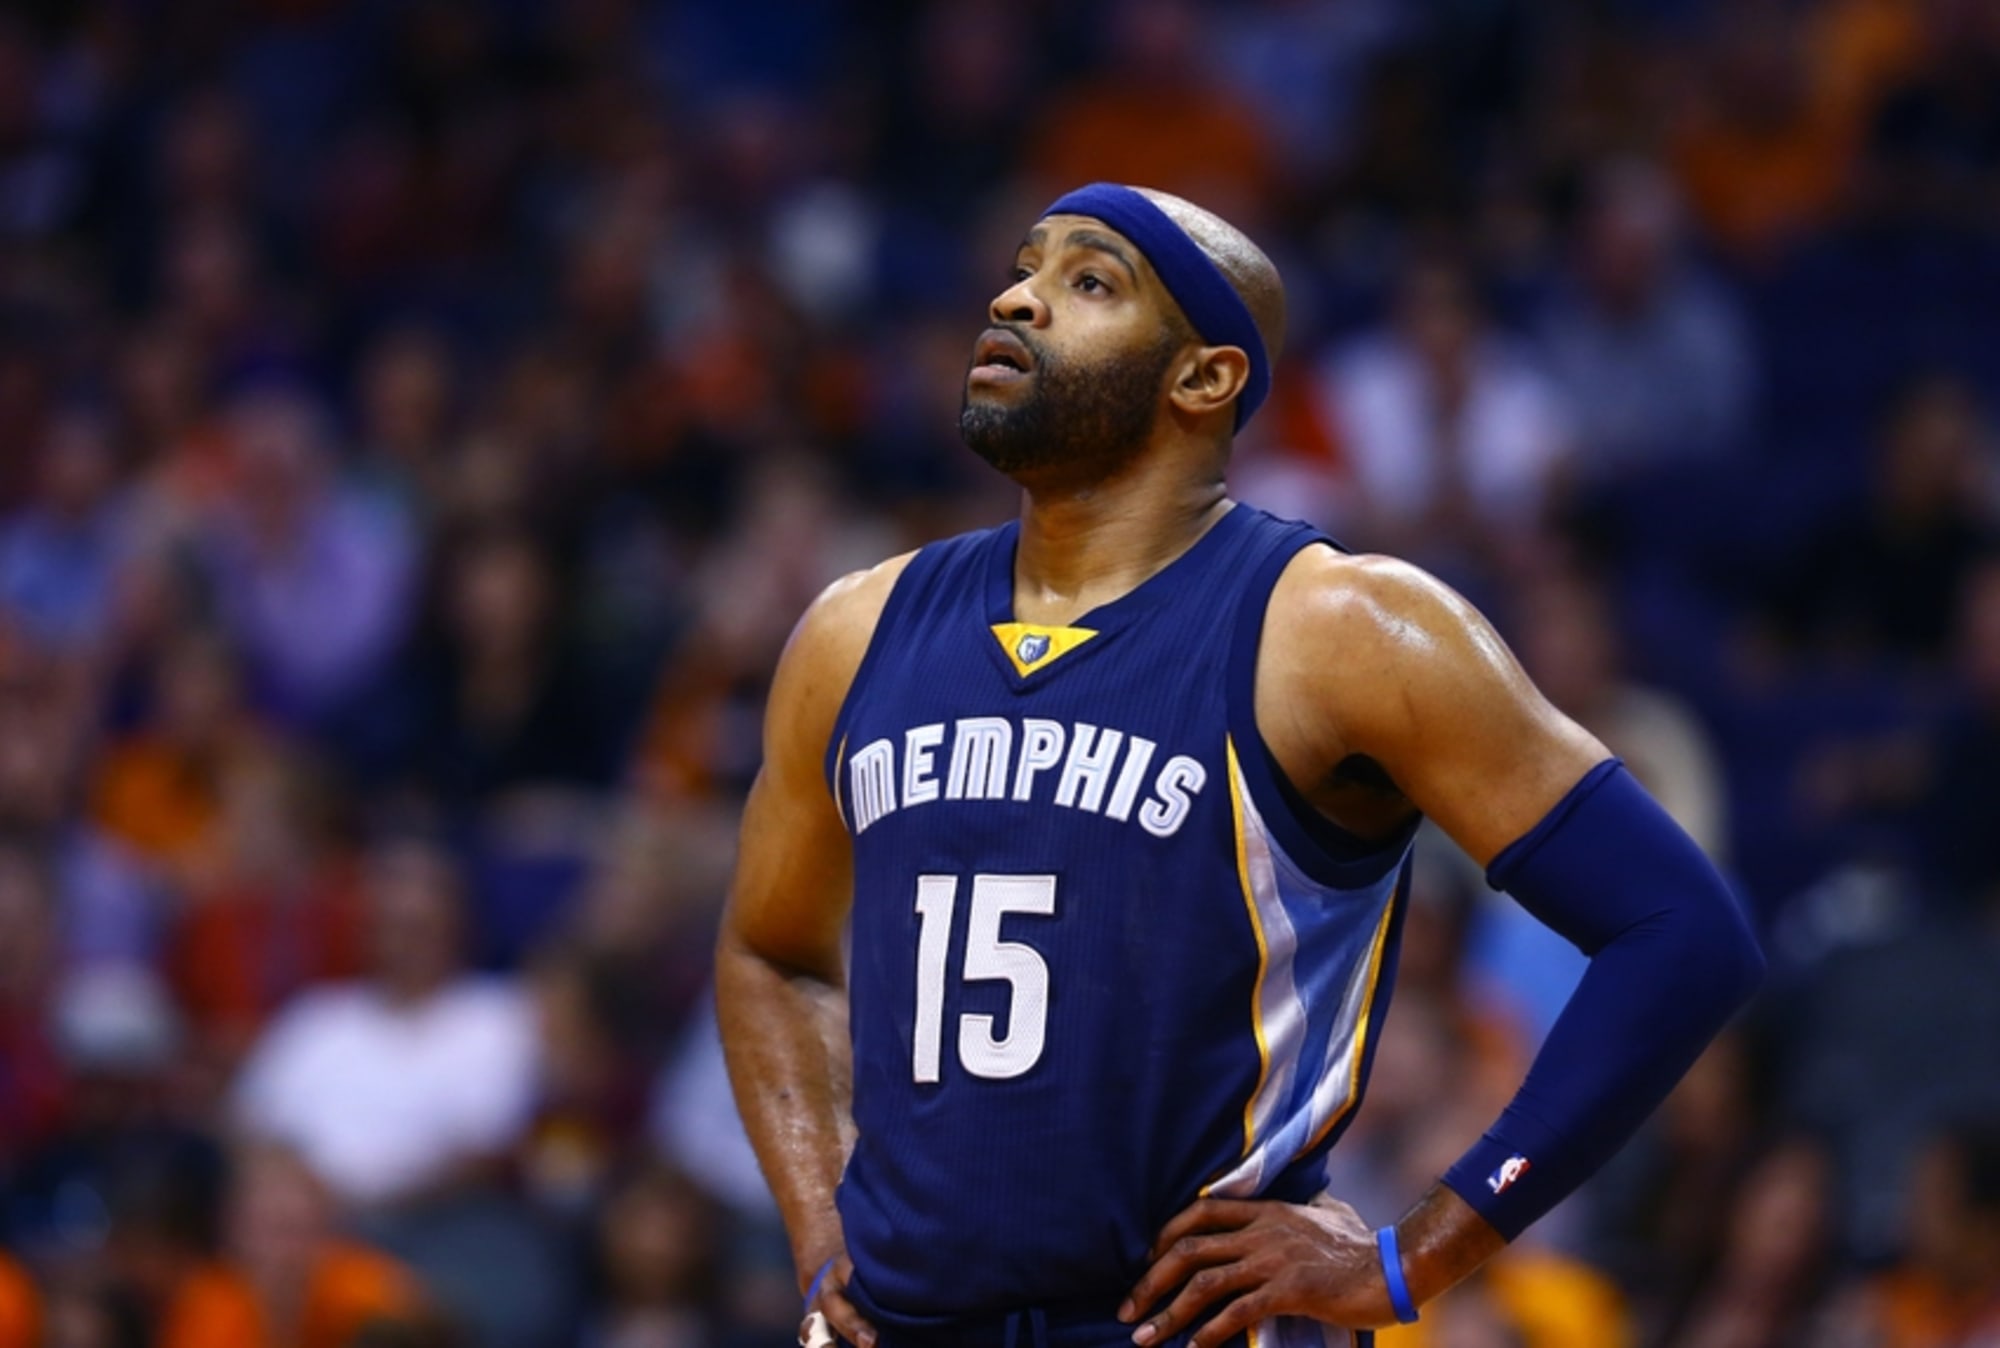 Vince Carter returns against the Cavs: Receives standing ovation